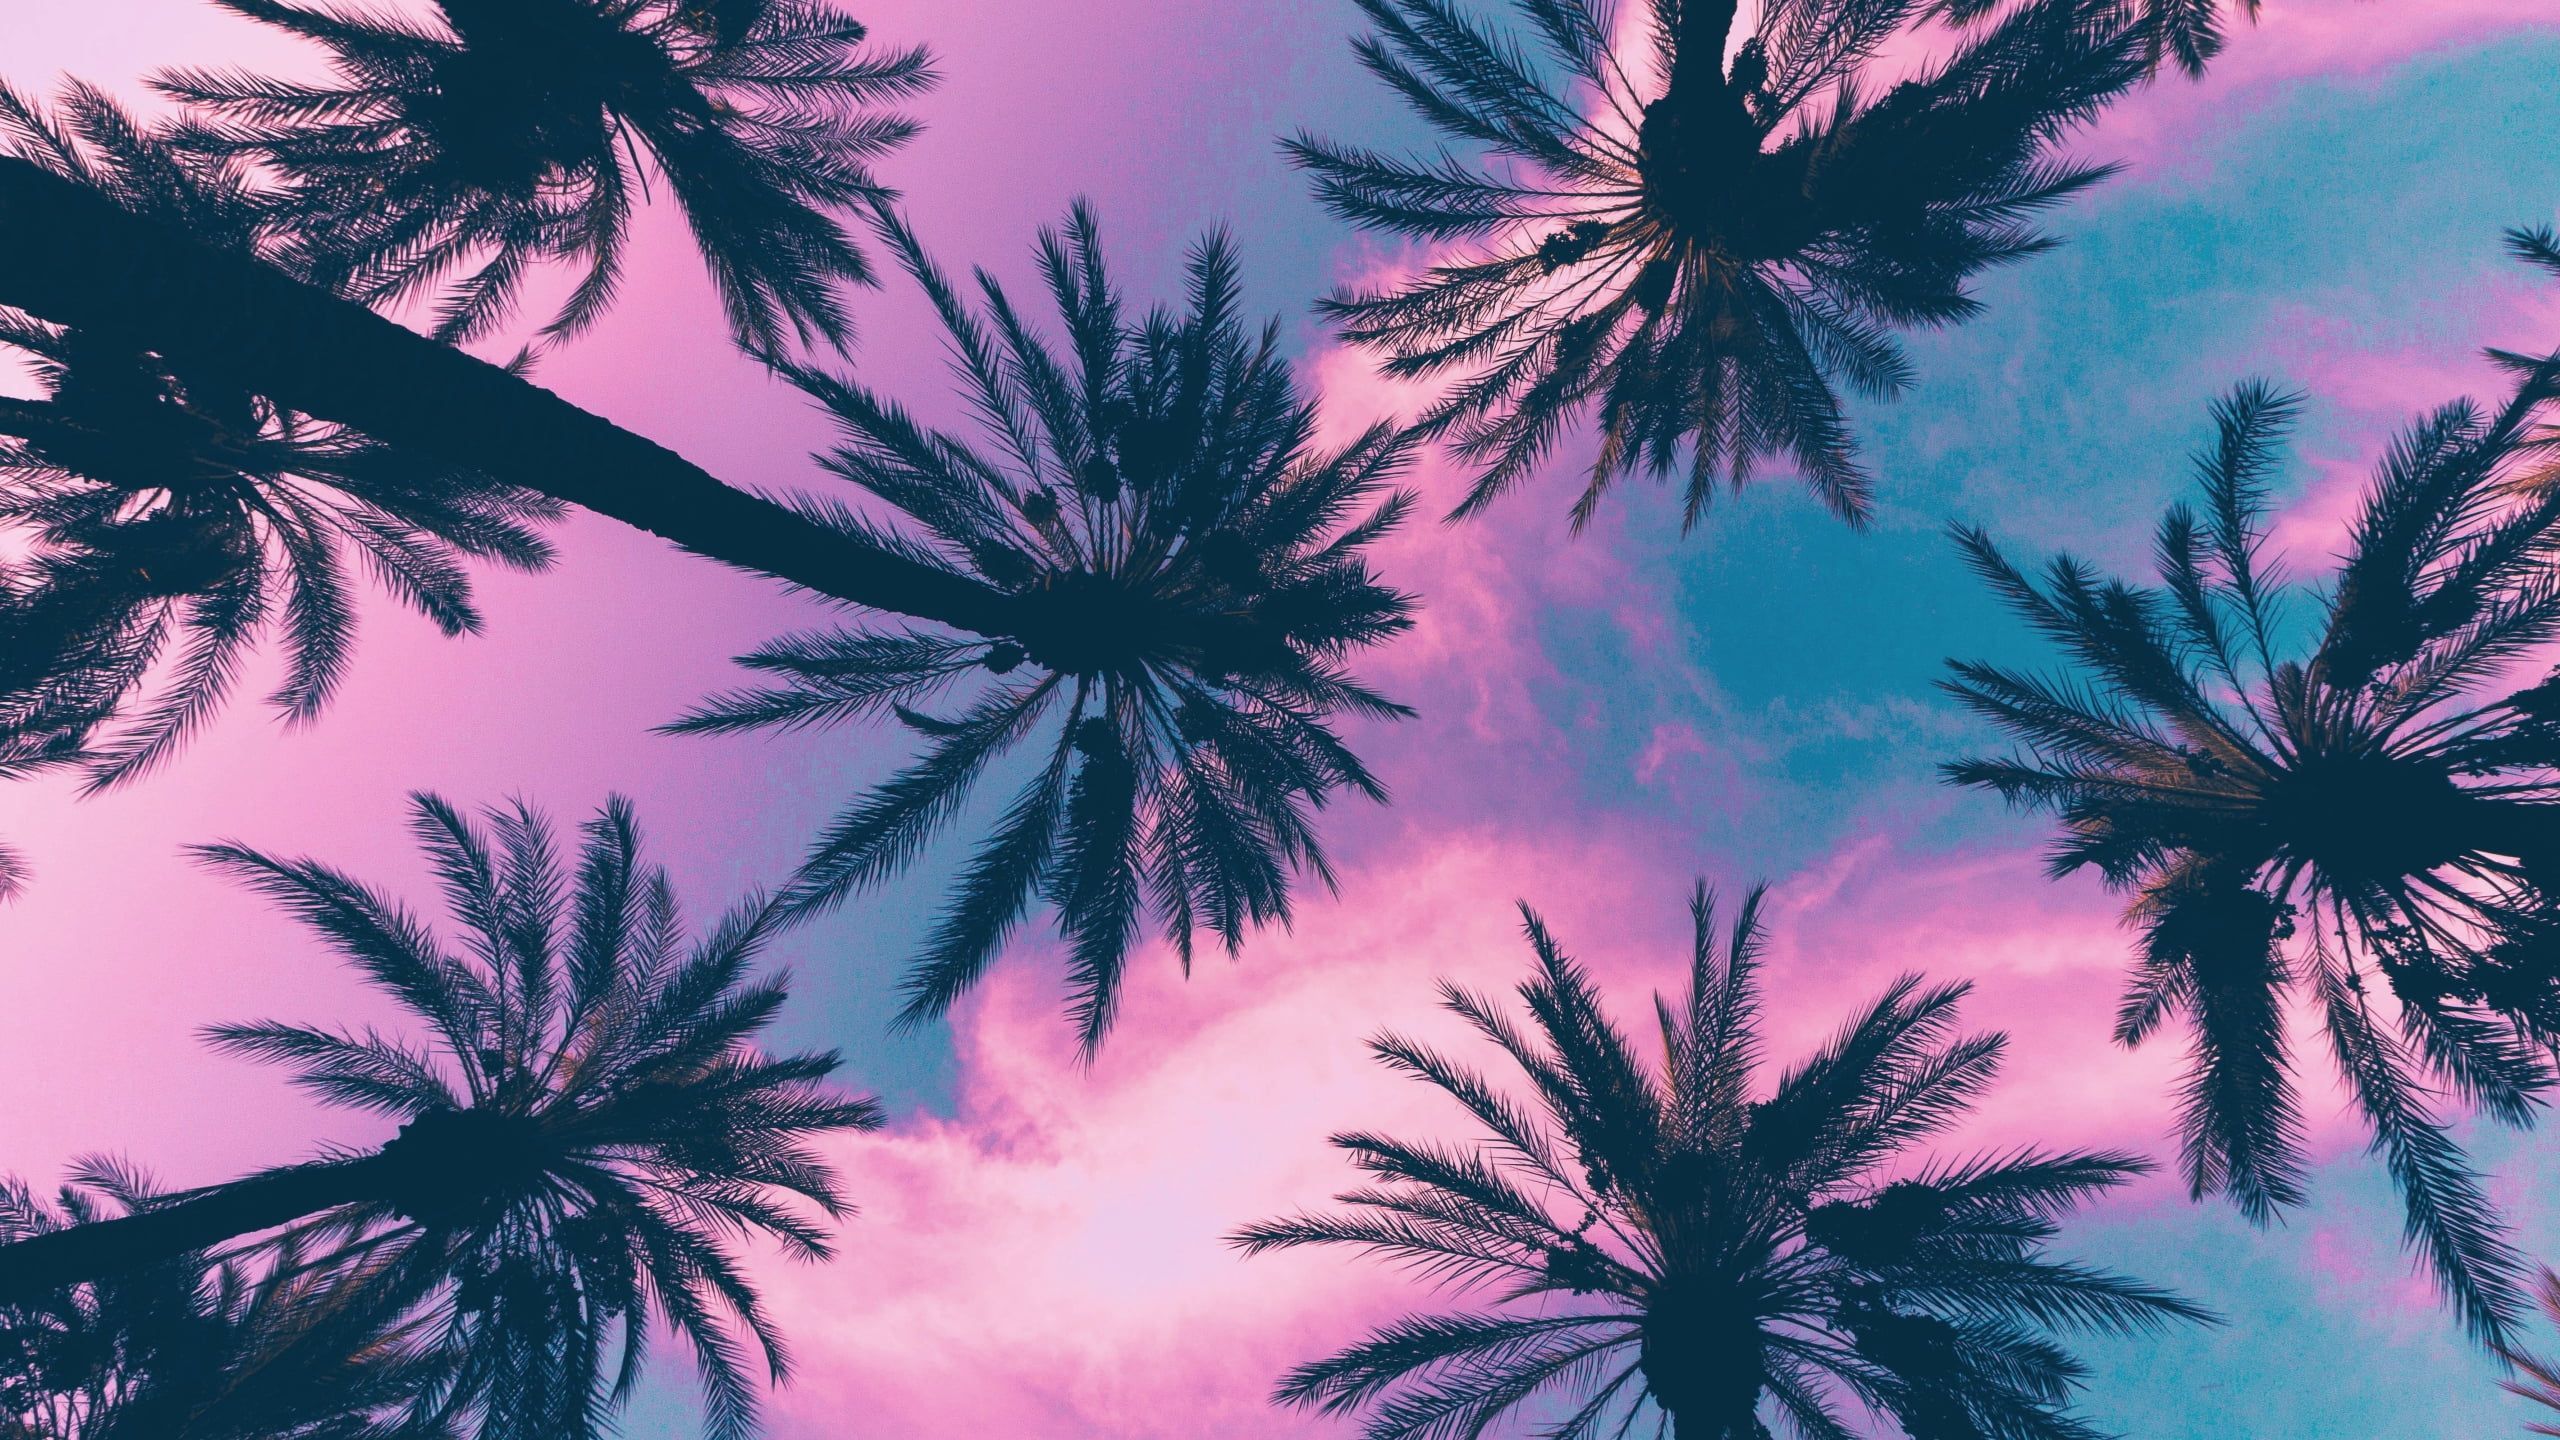 Palm trees against a pink and blue sky - Palm tree